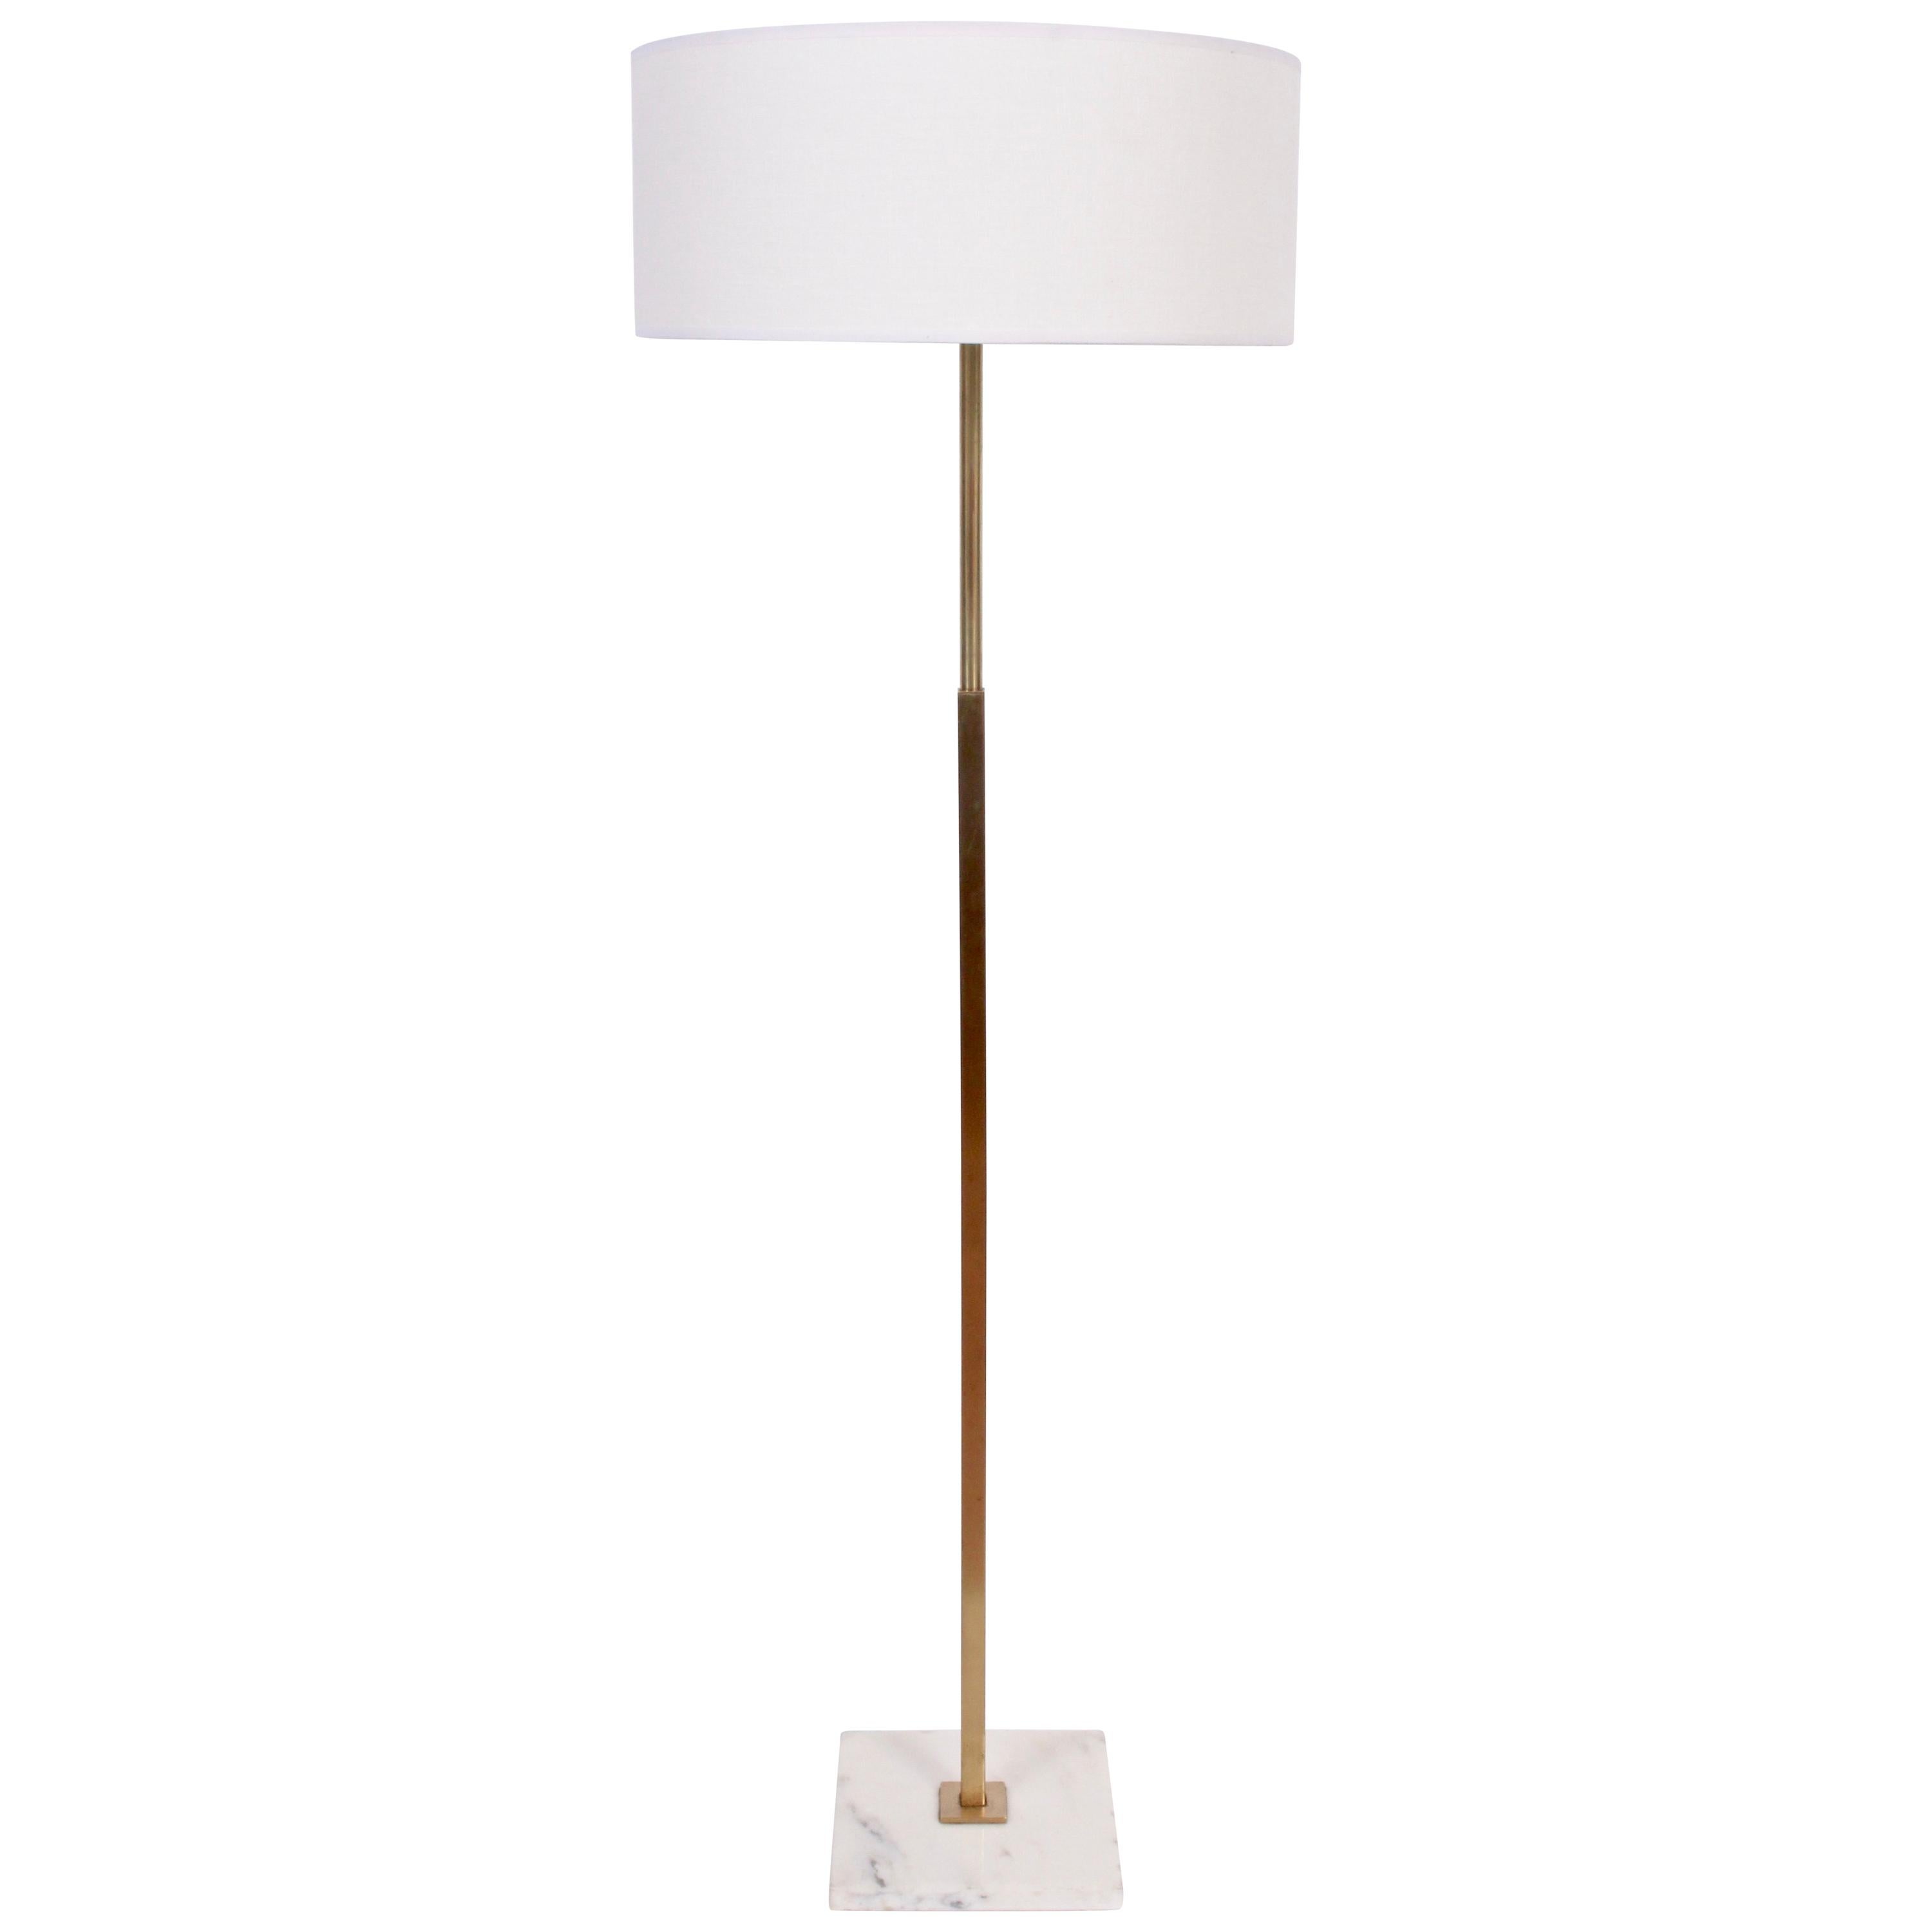 Gerald Thurston for Stiffel Marble and Brass Floor Lamp, 1960s